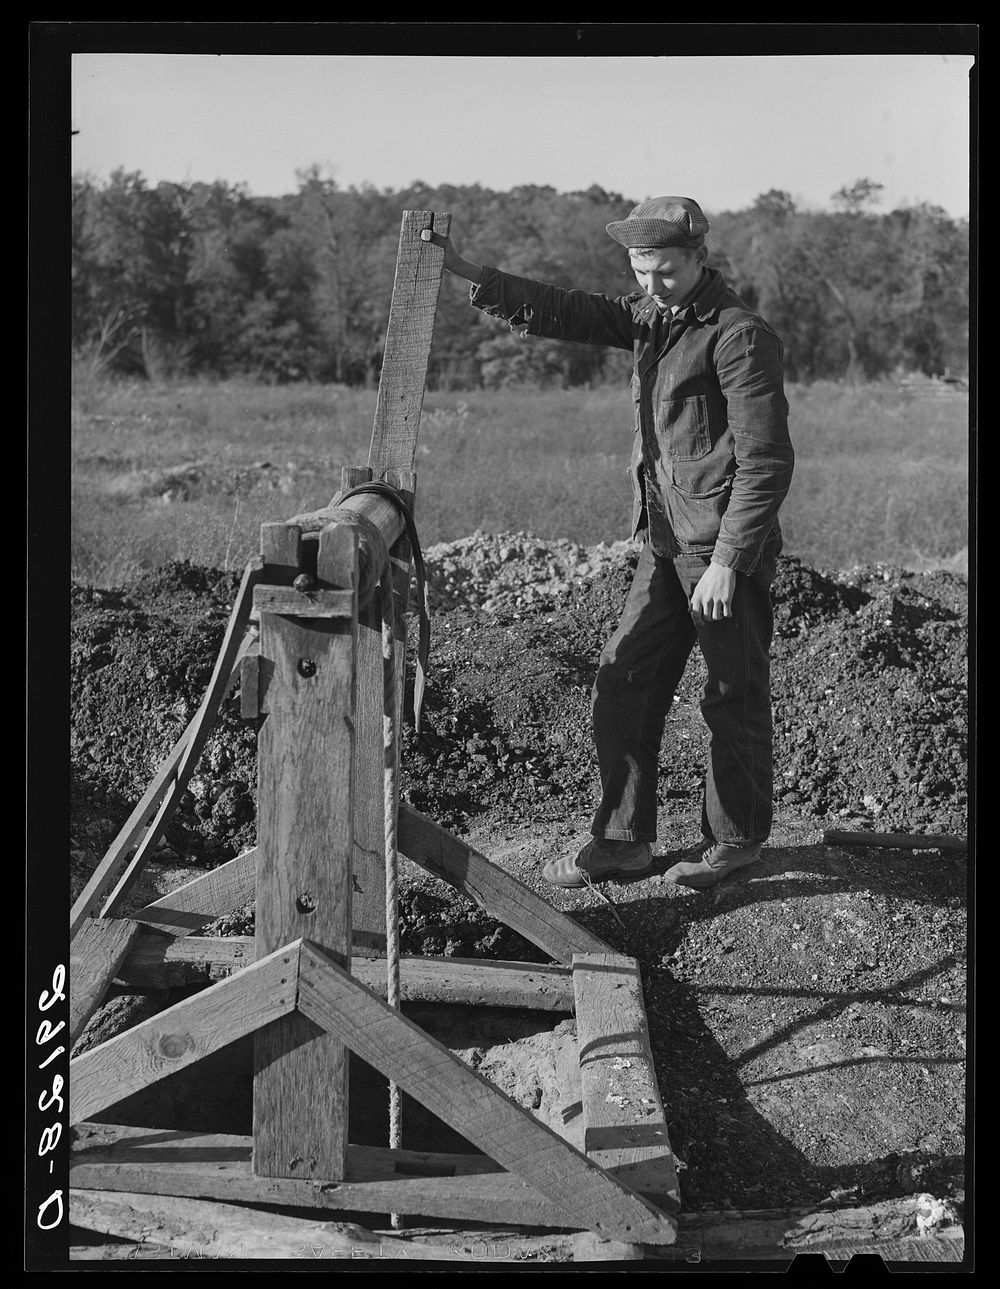 Crude windlass used in hauling tiff to surface. Washington County, Missouri. Sourced from the Library of Congress.